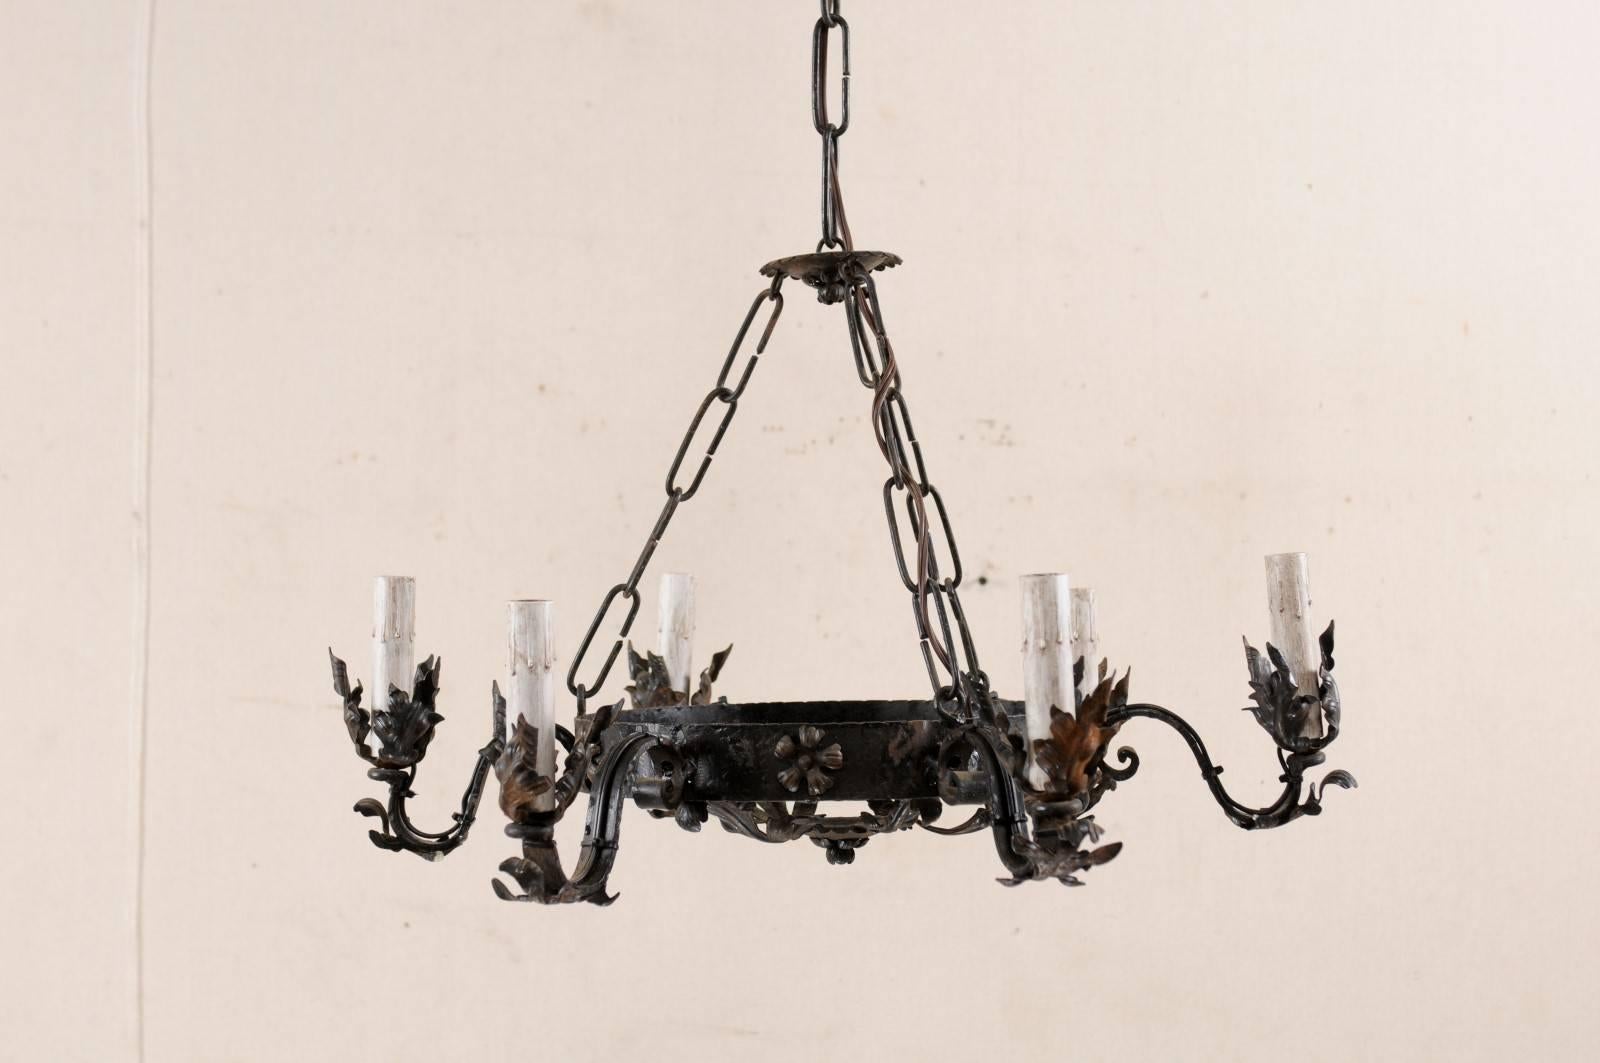 French Mid-20th Century Ring Shaped Dark Iron Chandelier with Floral and Leaf Motifs For Sale